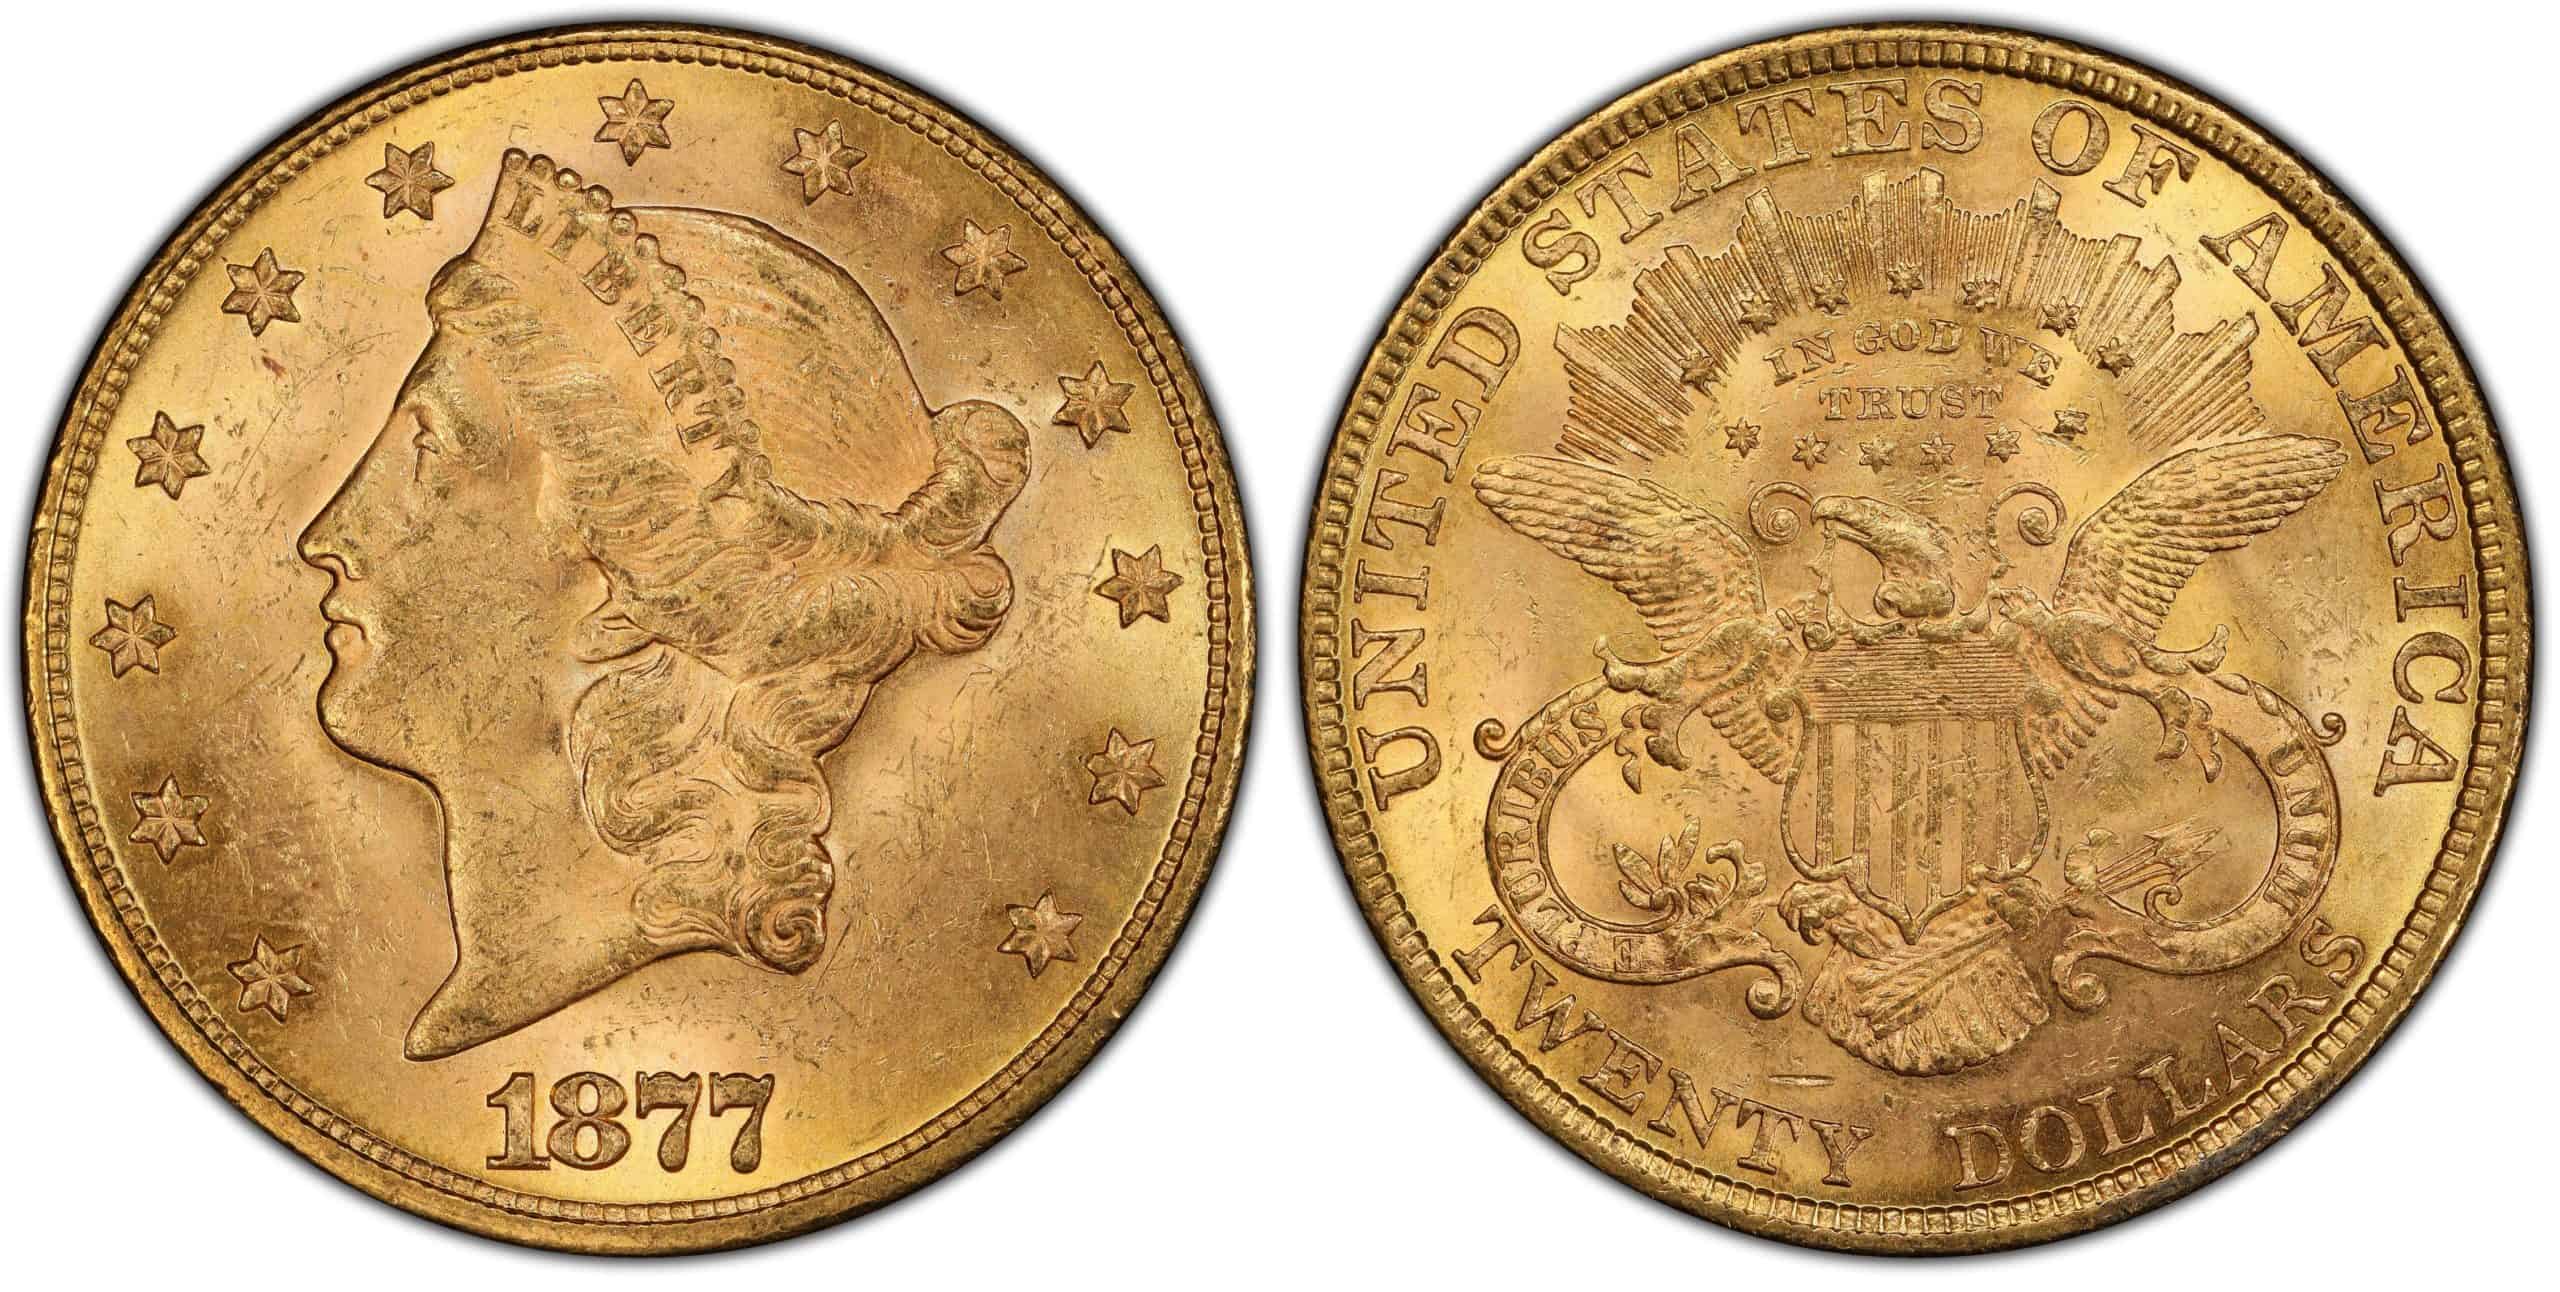 Liberty Head Twenty Dollar gold coins With Motto (Type I) minted from 1877 to 1907